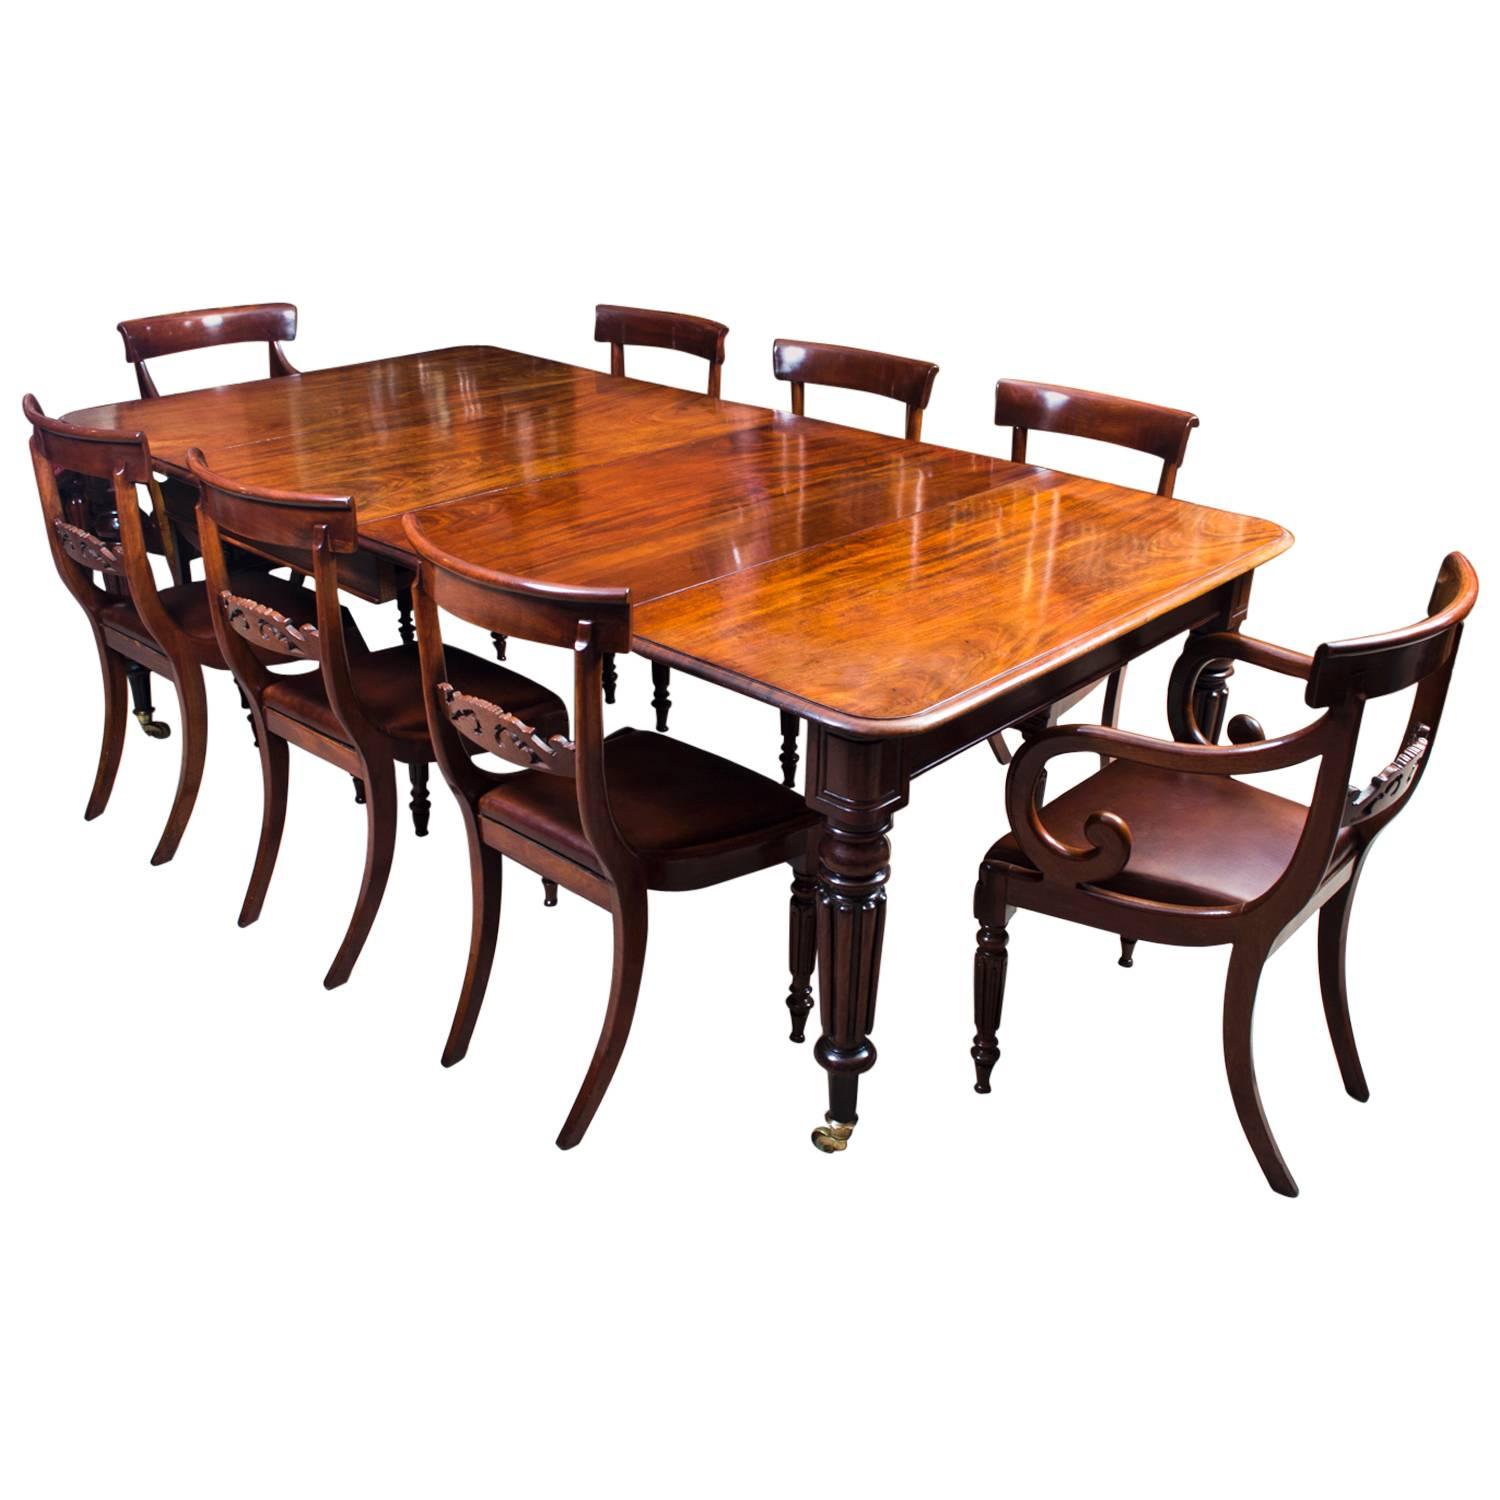 Antique Regency Gillows Dining Table Eight Regency Chairs